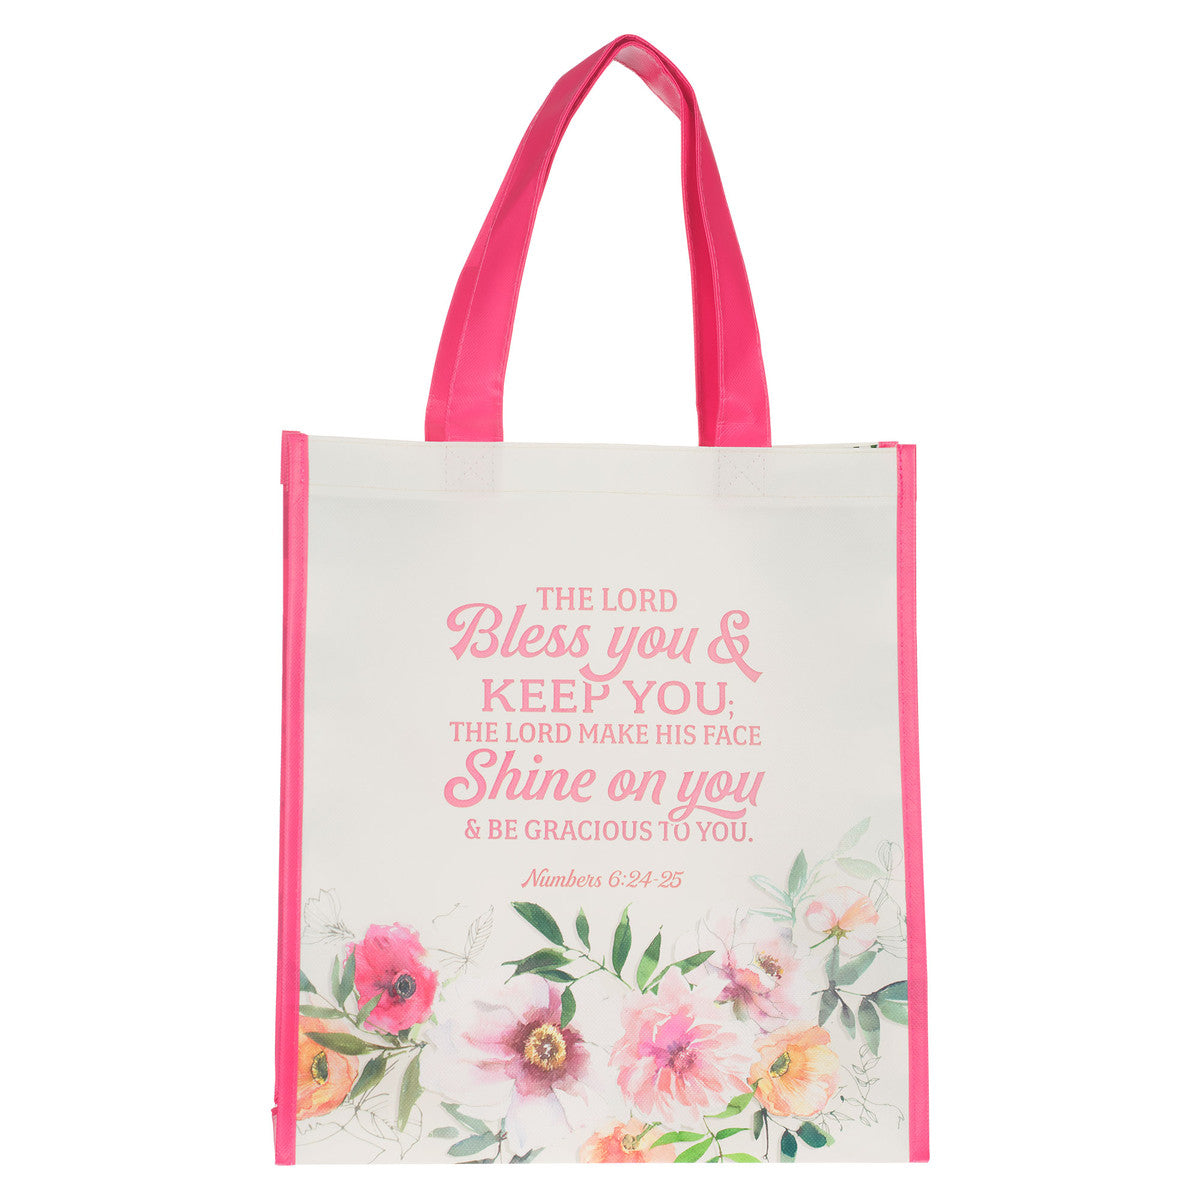 Bless You and Keep You Non-Woven Coated Tote Bag - Numbers 6:24-25